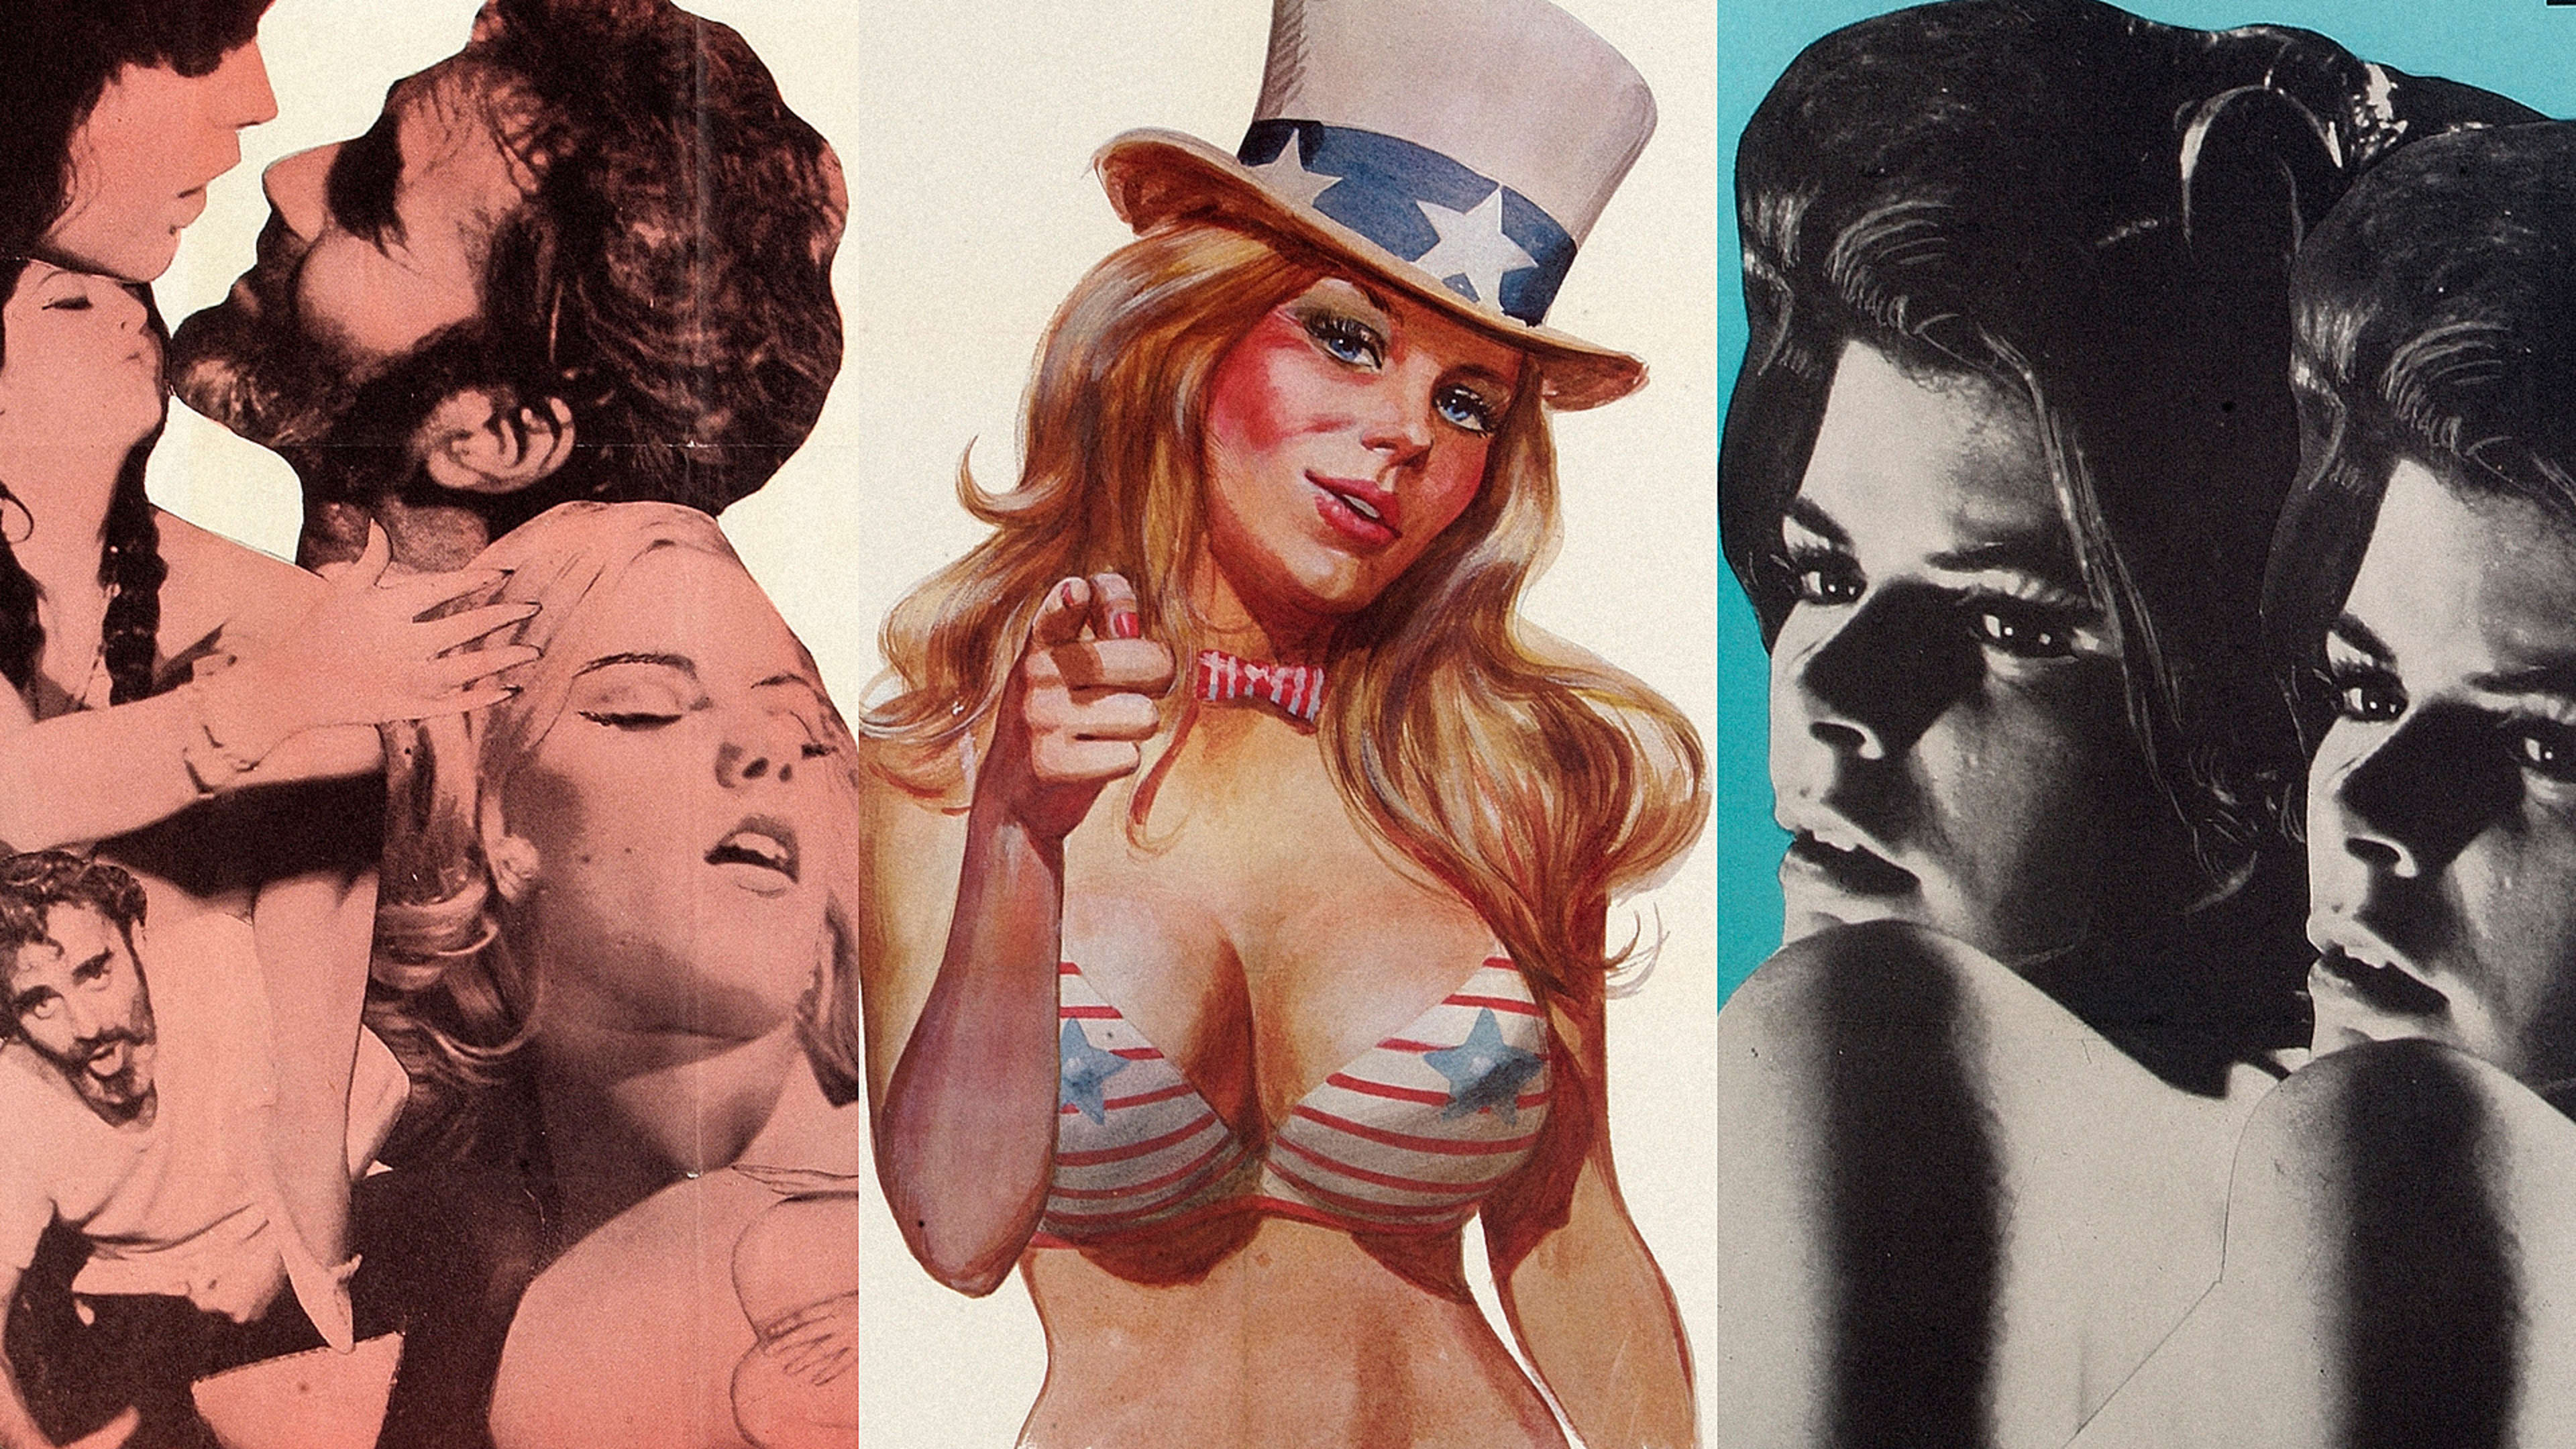 70s - The Glorious Graphic Design Of '70s Porn (NSFW) - Fast Company